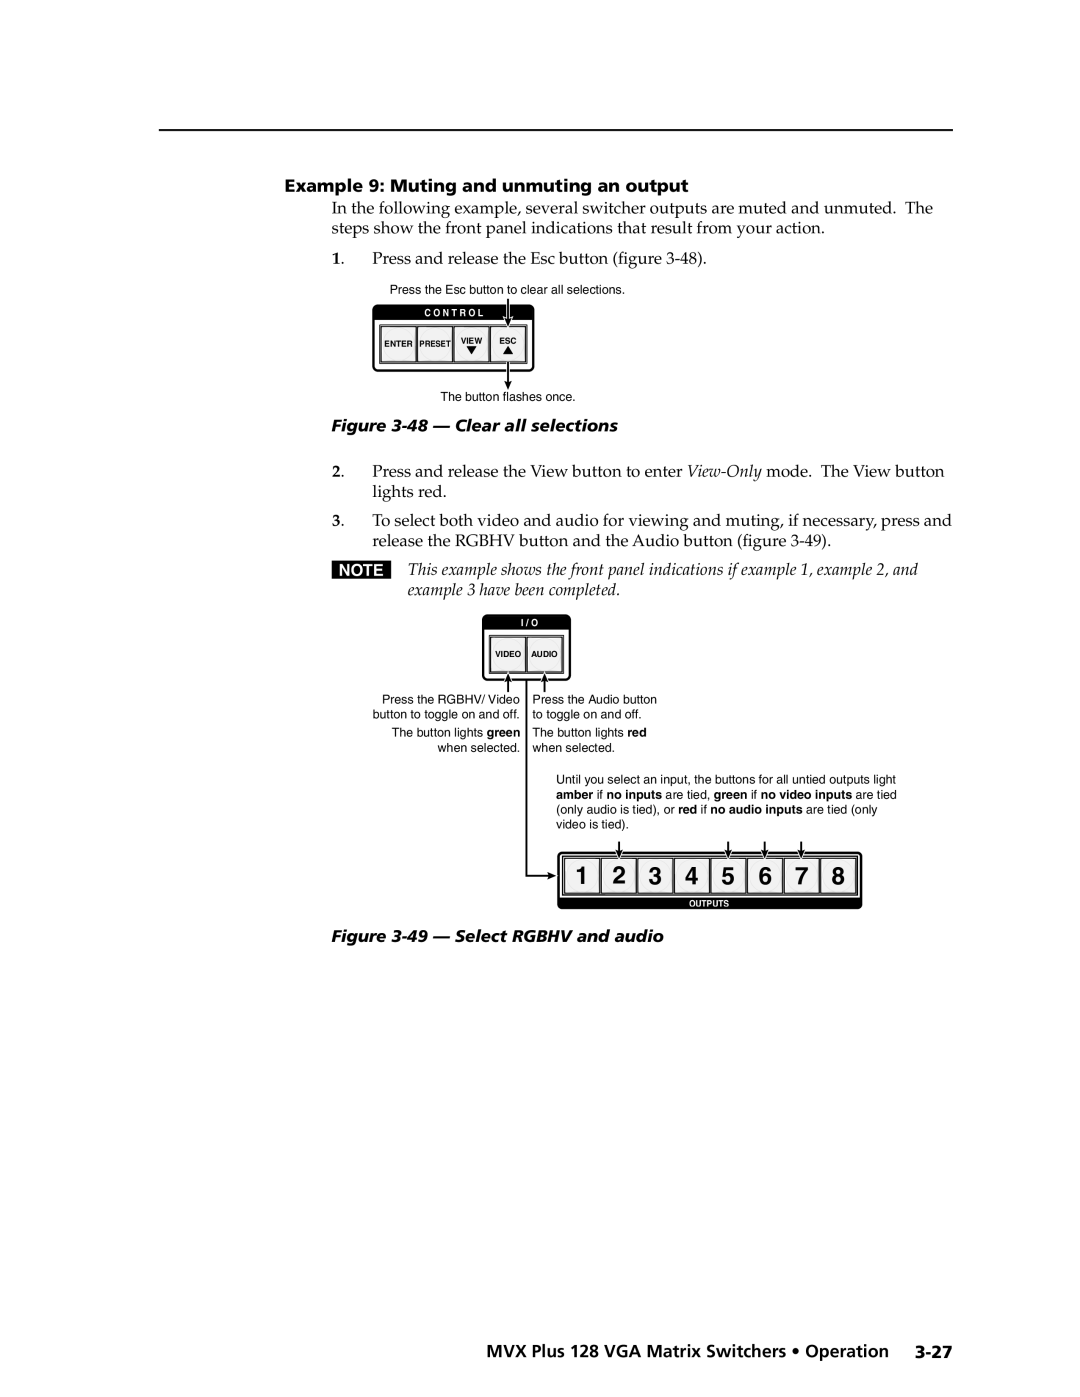 Extron electronic MVX PLUS 128 manual Example 9 Muting and unmuting an output, 48 - Clear all selections 